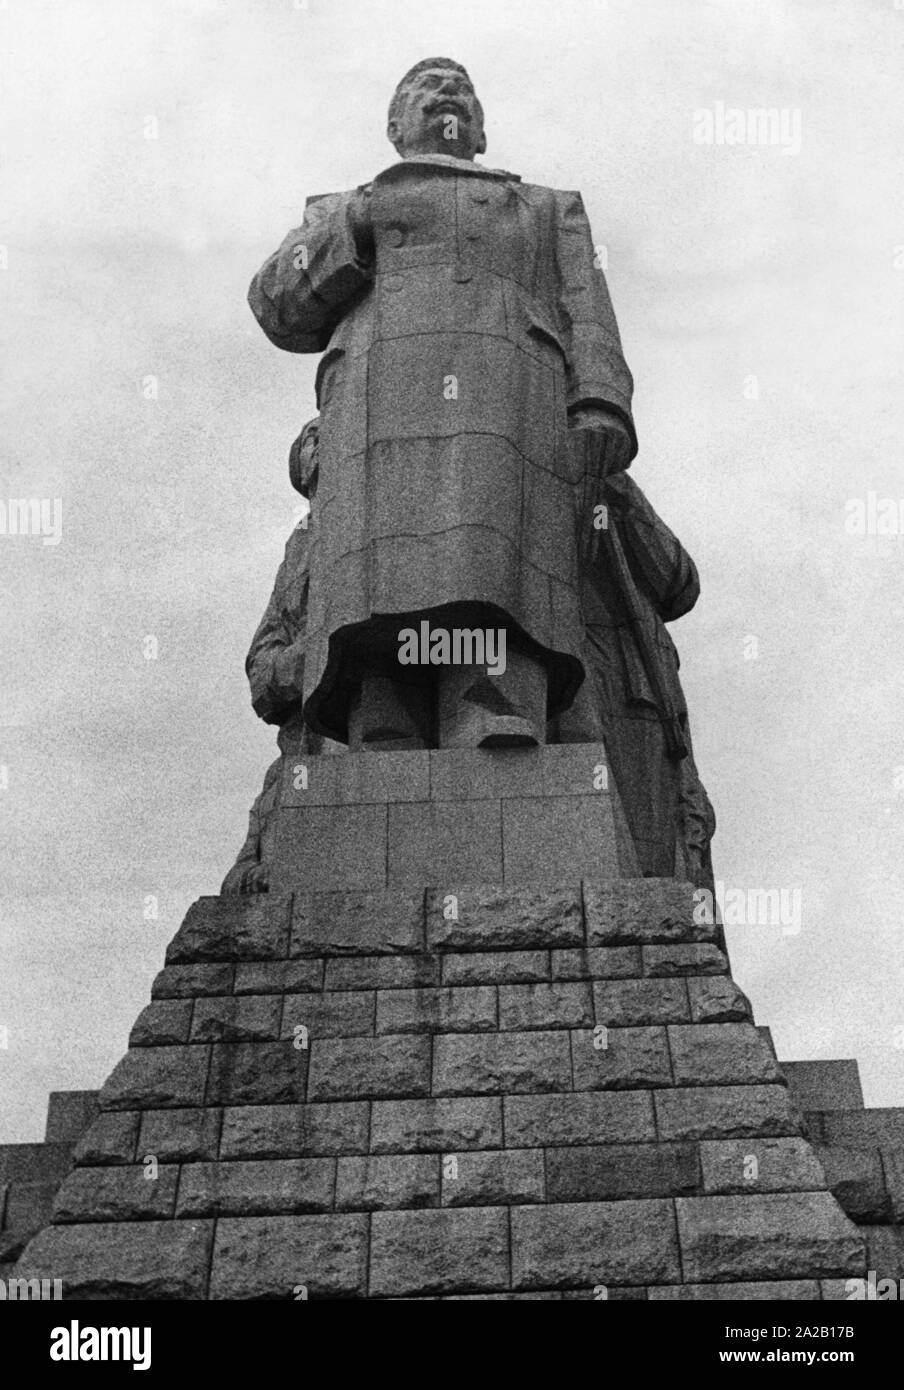 The Stalin Memorial in Prague was inaugurated in 1955 and reopened in 1962. It was the world's largest depiction of Joseph Stalin. Stock Photo